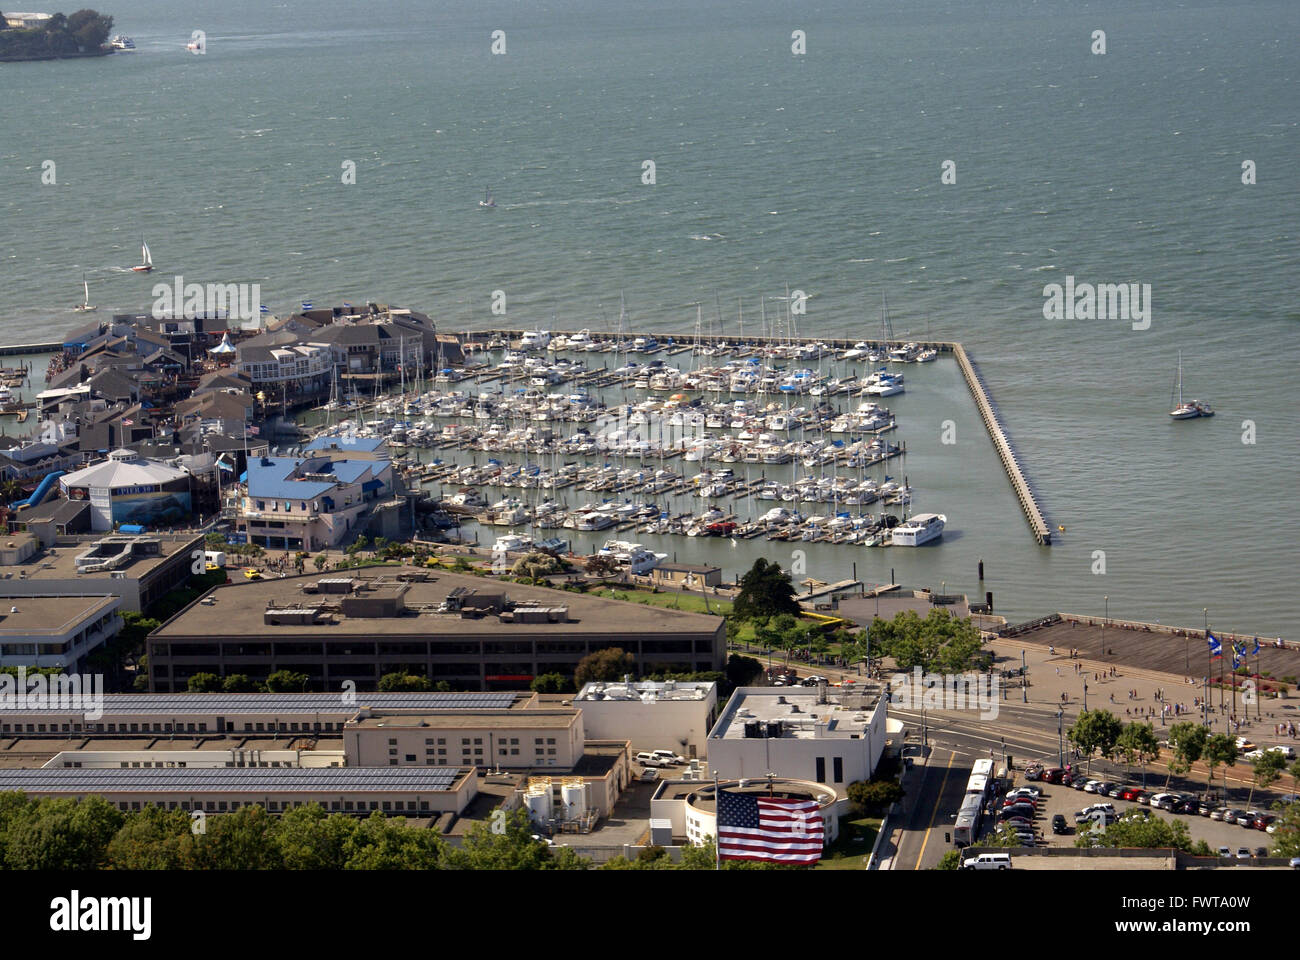 San Francisco bay area shoreline with ships and ferry boats for carrying tourists to various important tourist spots Stock Photo